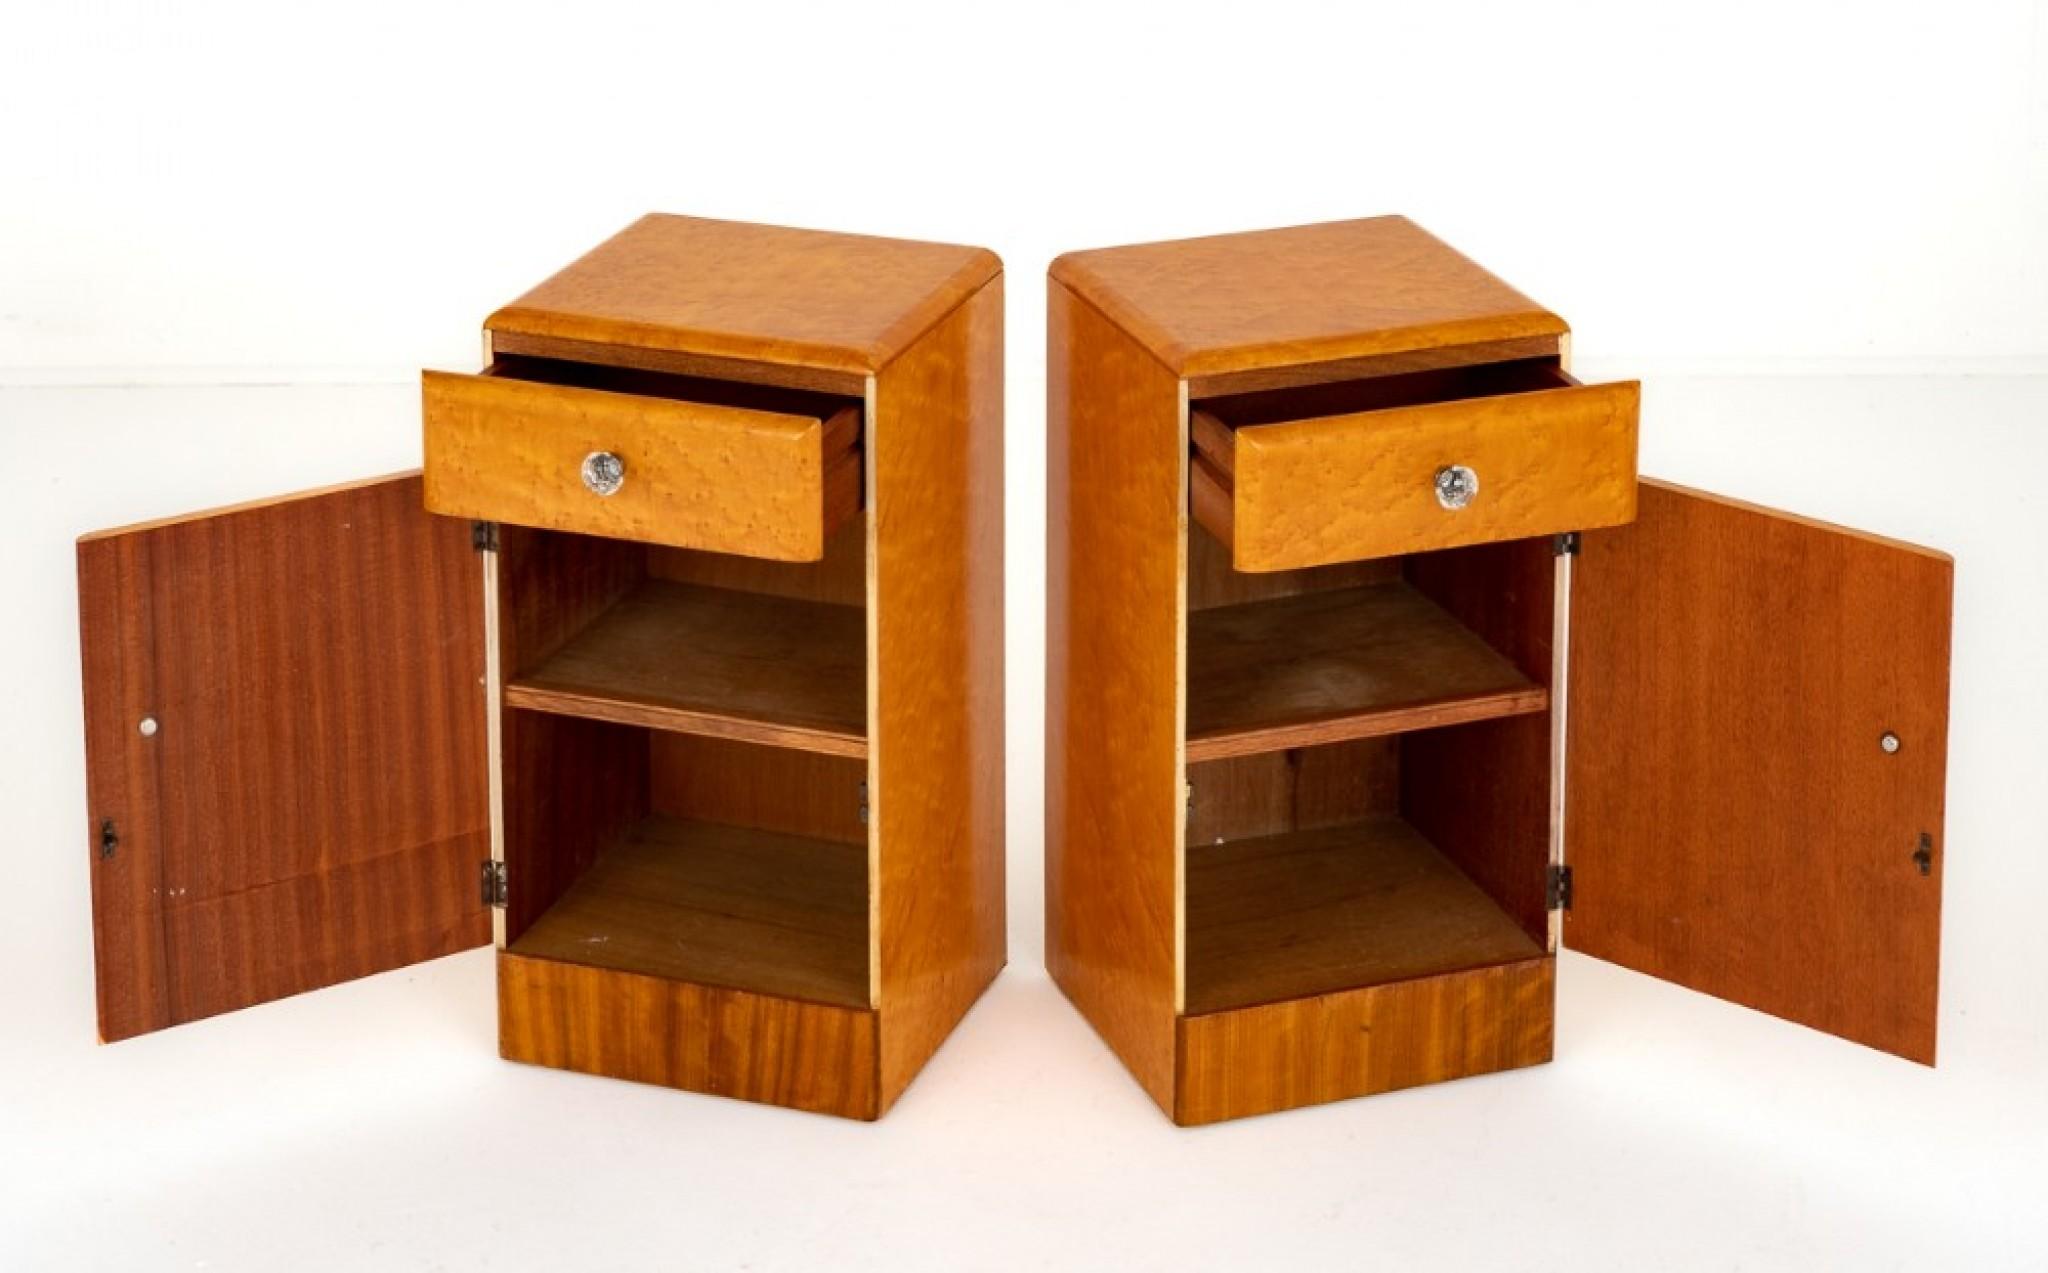 Period Art Deco Bedside Chests 1930s Nightstands For Sale 2